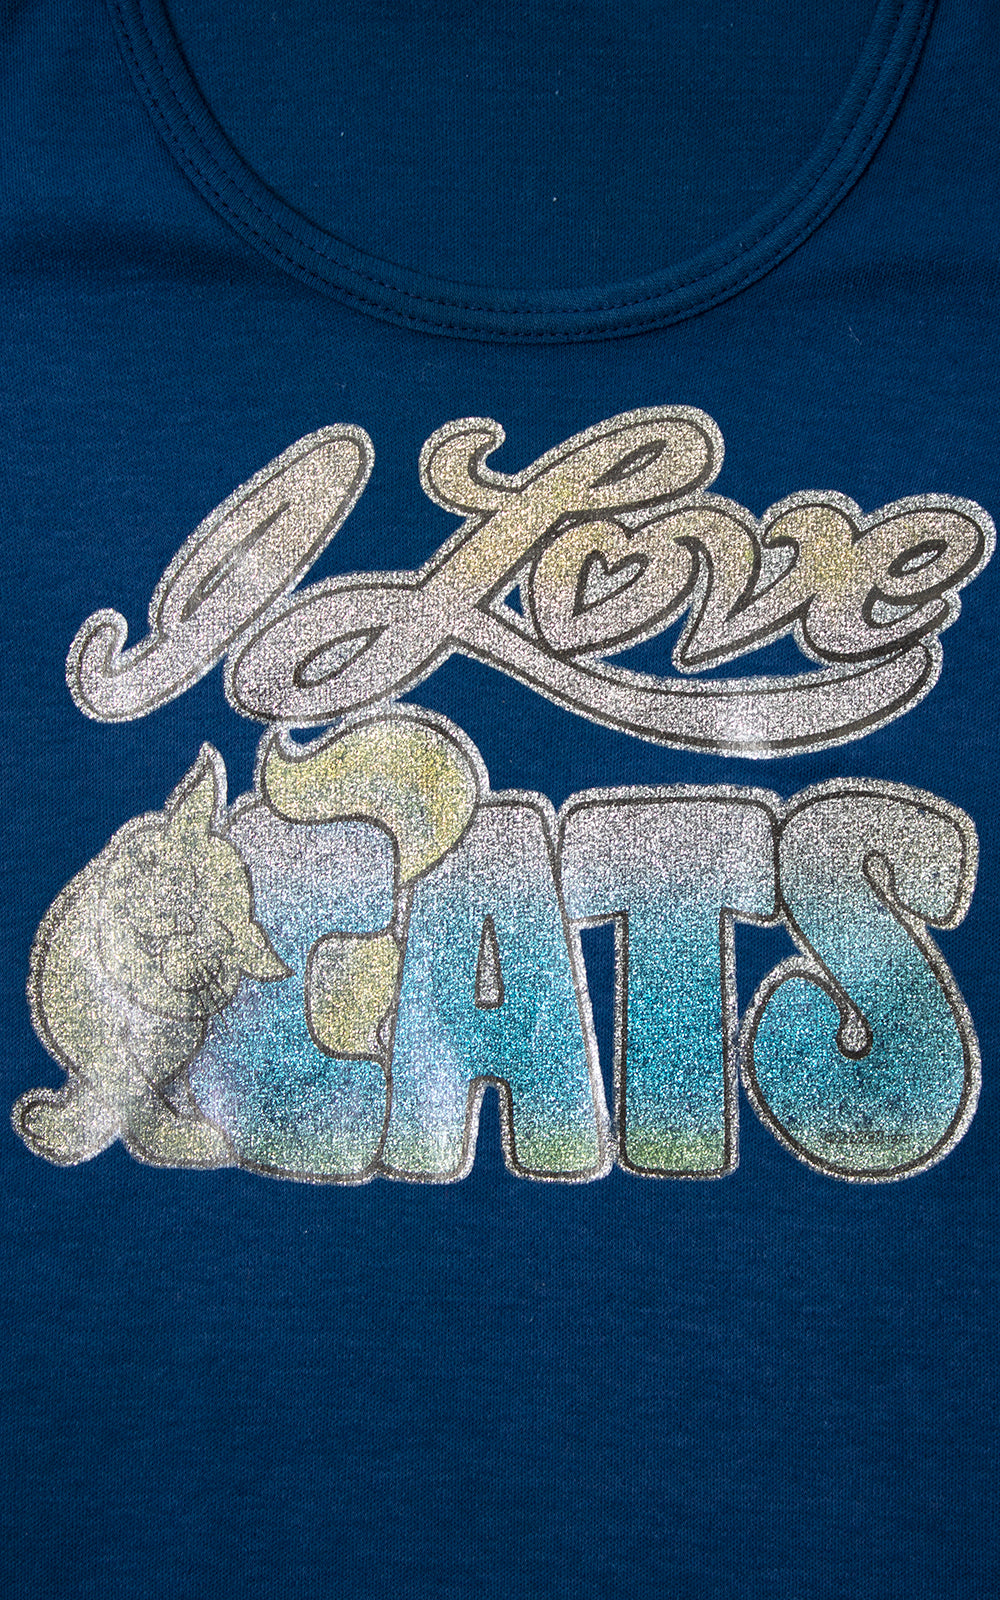 Vintage 1970s "I Love Cats" Iron-On Transfer Long Sleeve Tee by Birthday Life Vintage